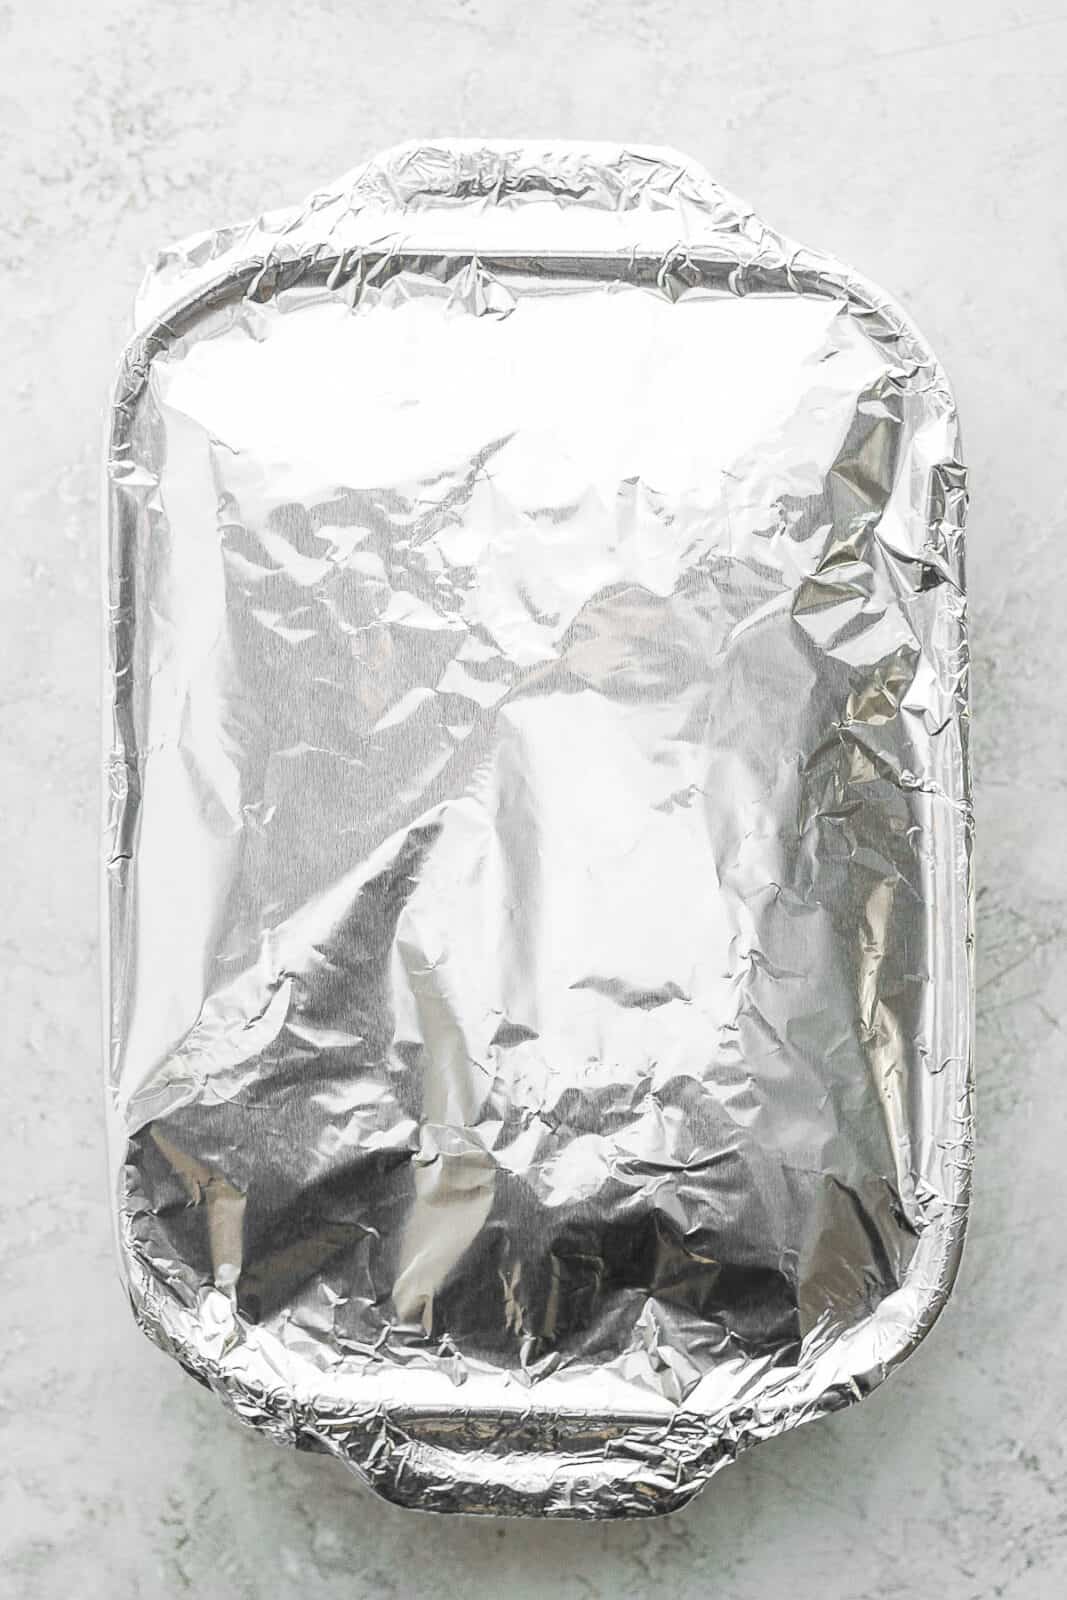 The pan of sliders with aluminum foil on top.